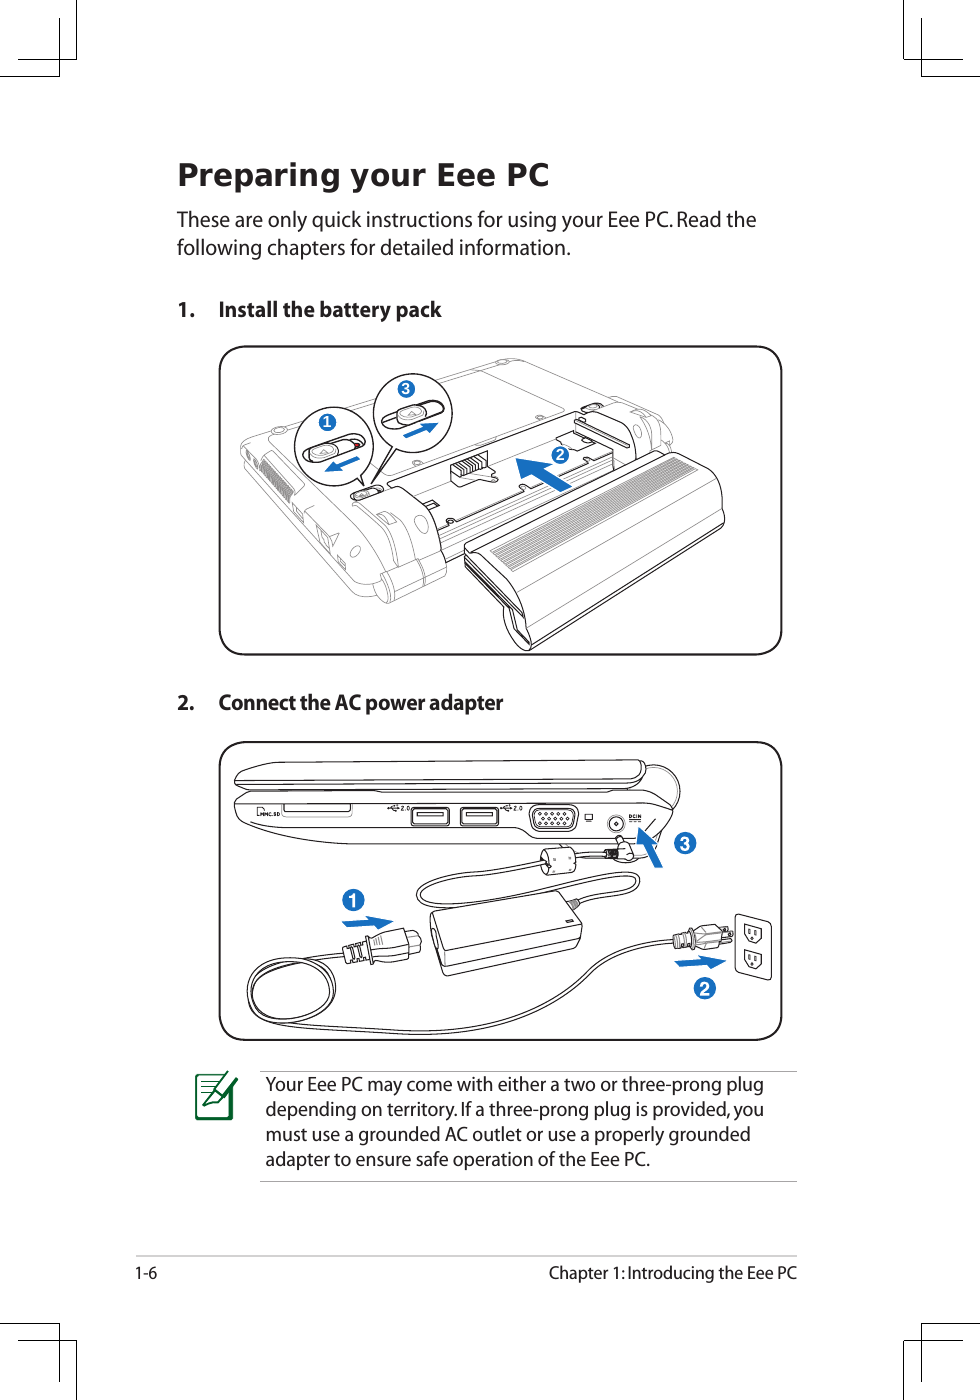 1-6Chapter 1: Introducing the Eee PCPreparing your Eee PCThese are only quick instructions for using your Eee PC. Read the following chapters for detailed information.1.  Install the battery pack2.  Connect the AC power adapterYour Eee PC may come with either a two or three-prong plug depending on territory. If a three-prong plug is provided, you must use a grounded AC outlet or use a properly grounded adapter to ensure safe operation of the Eee PC.132123